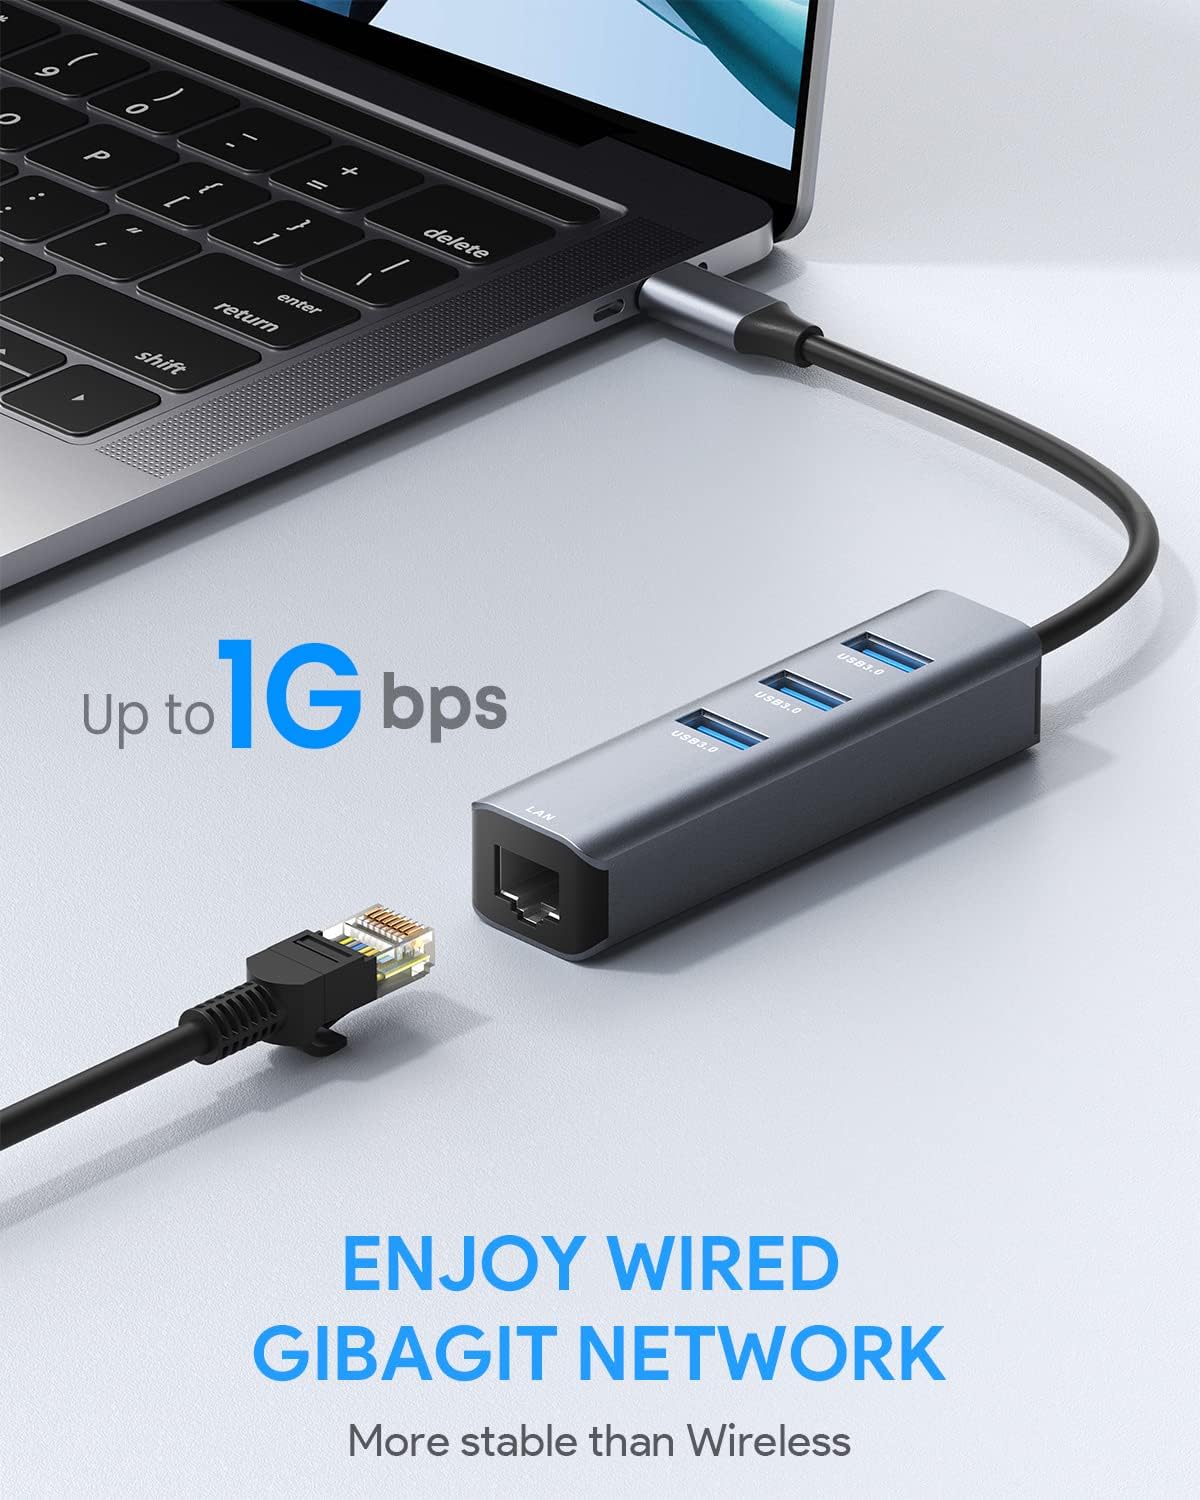 4-In-1 USB-C Hub to Ethernet Adapter